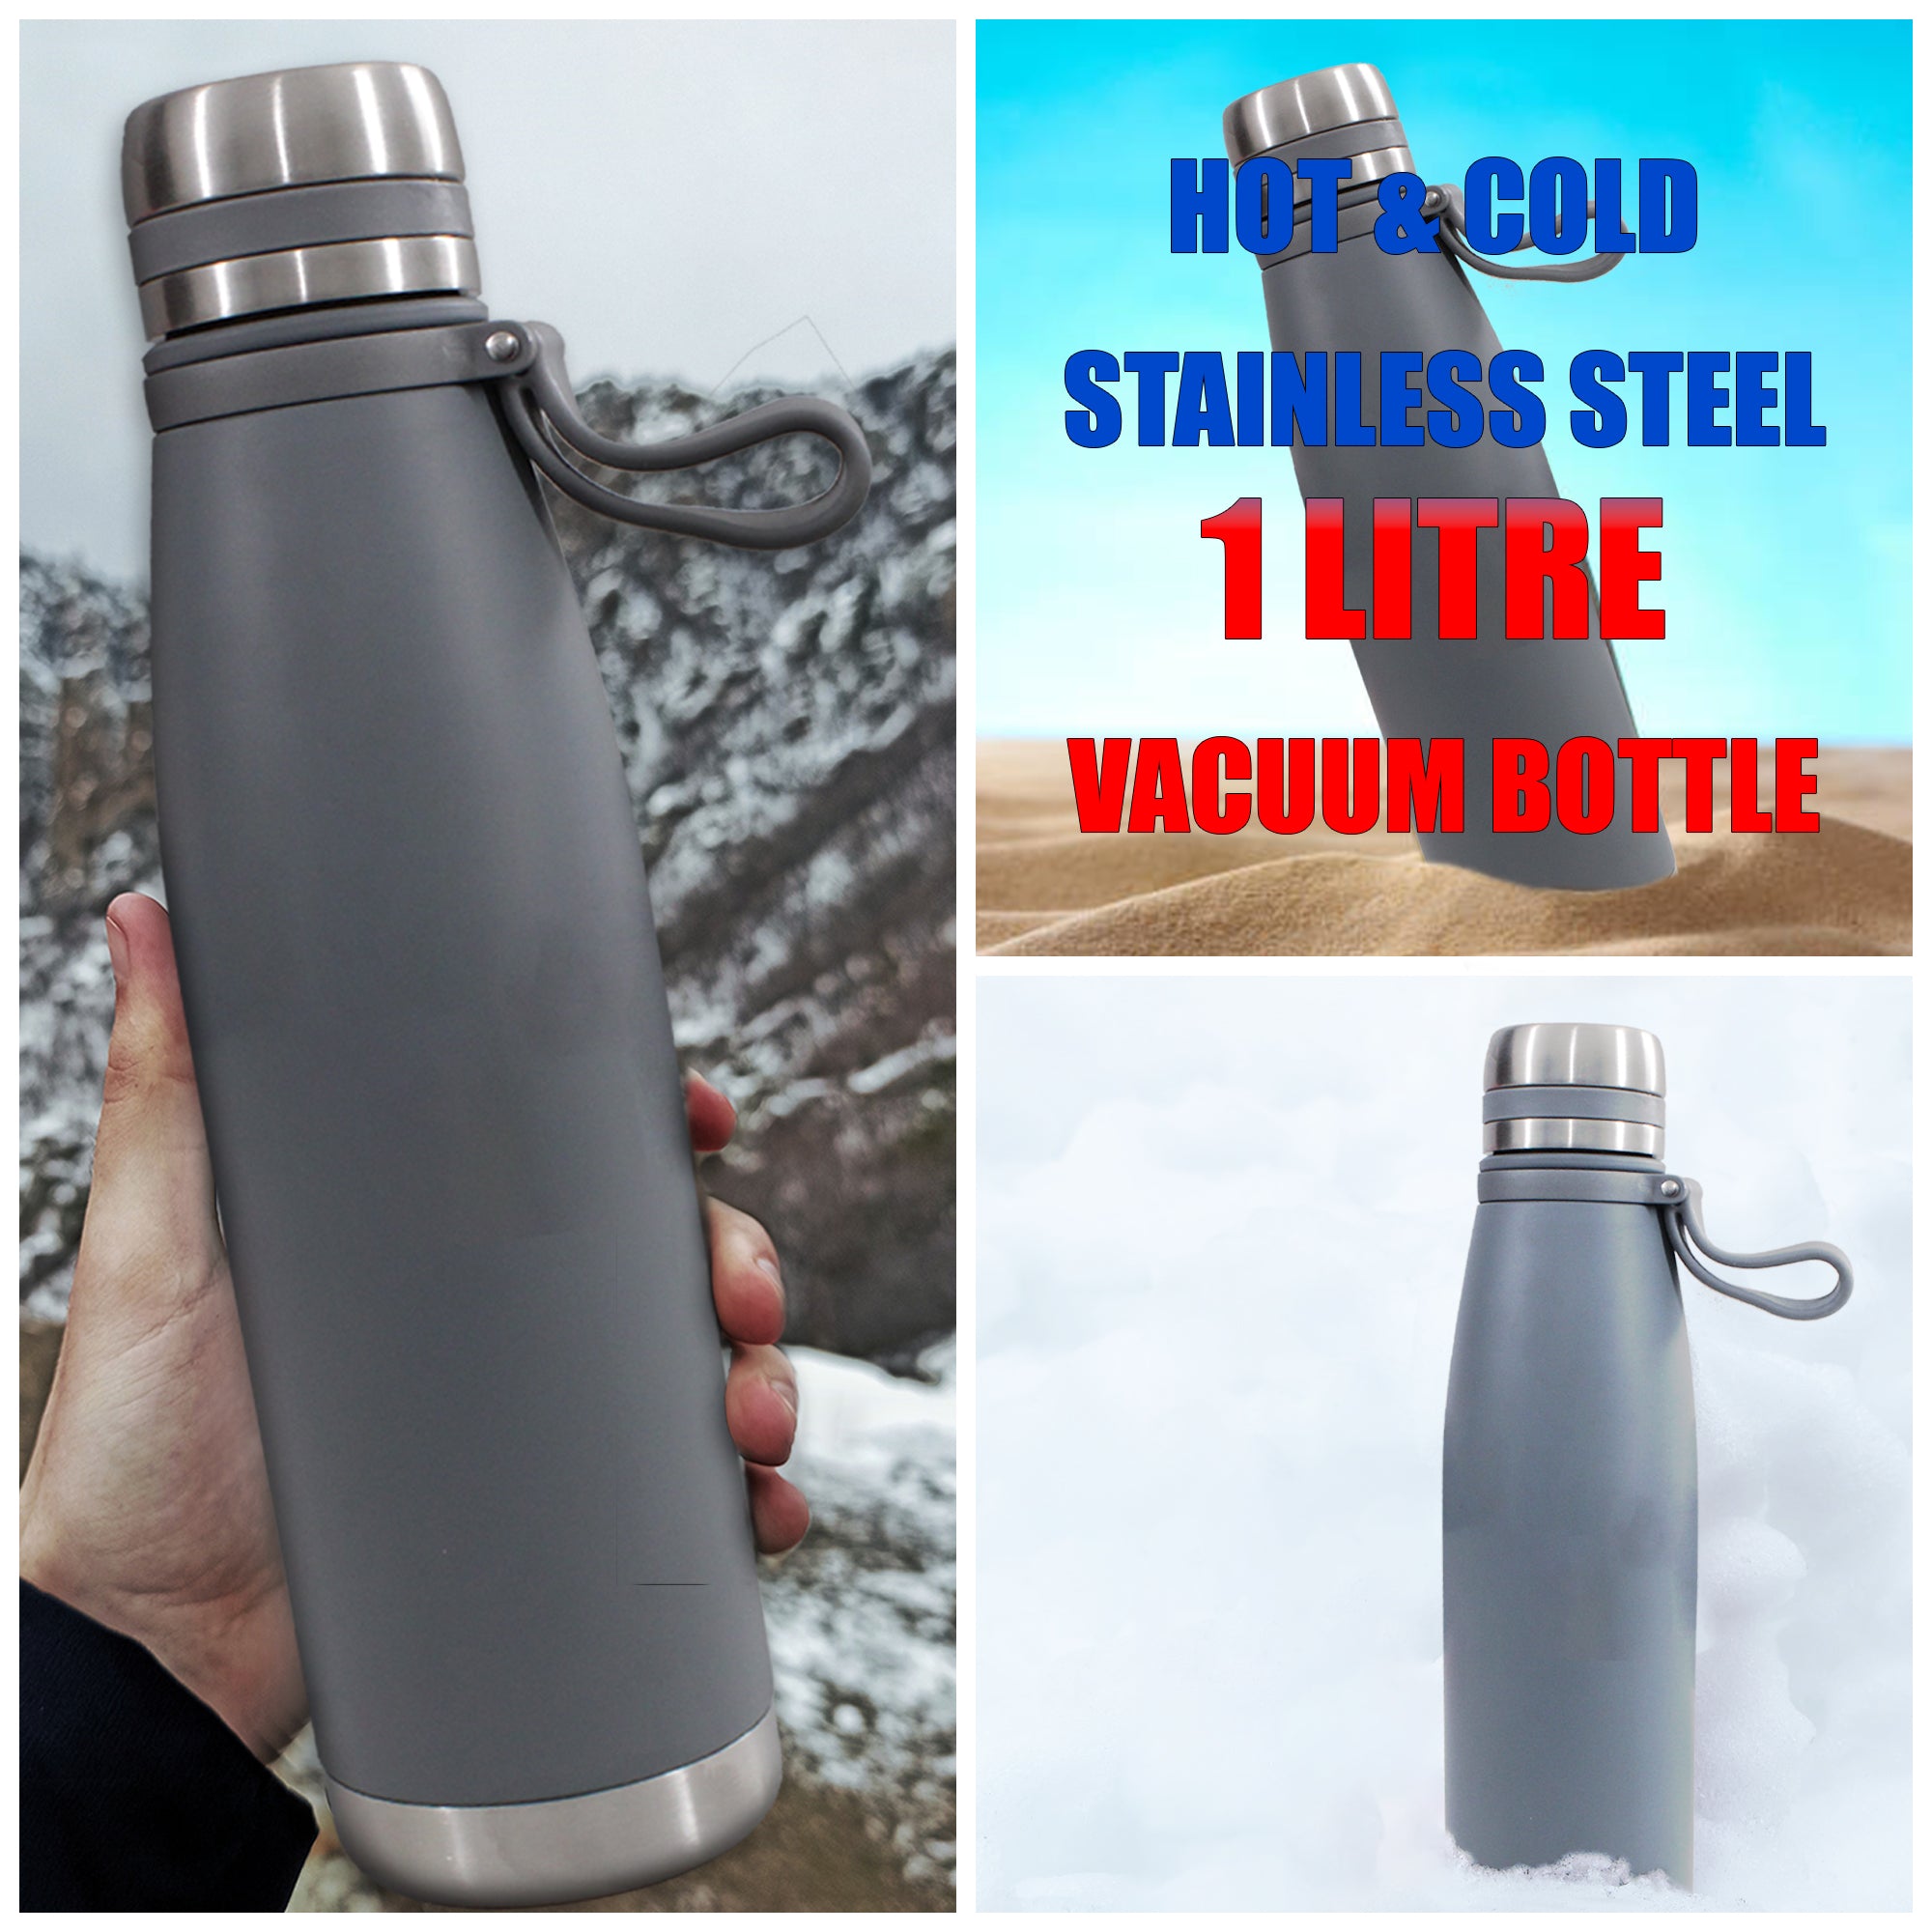 Stainless Steel Hot & Cold Vacuum Bottle with Strap & Strainer - 1 Litre